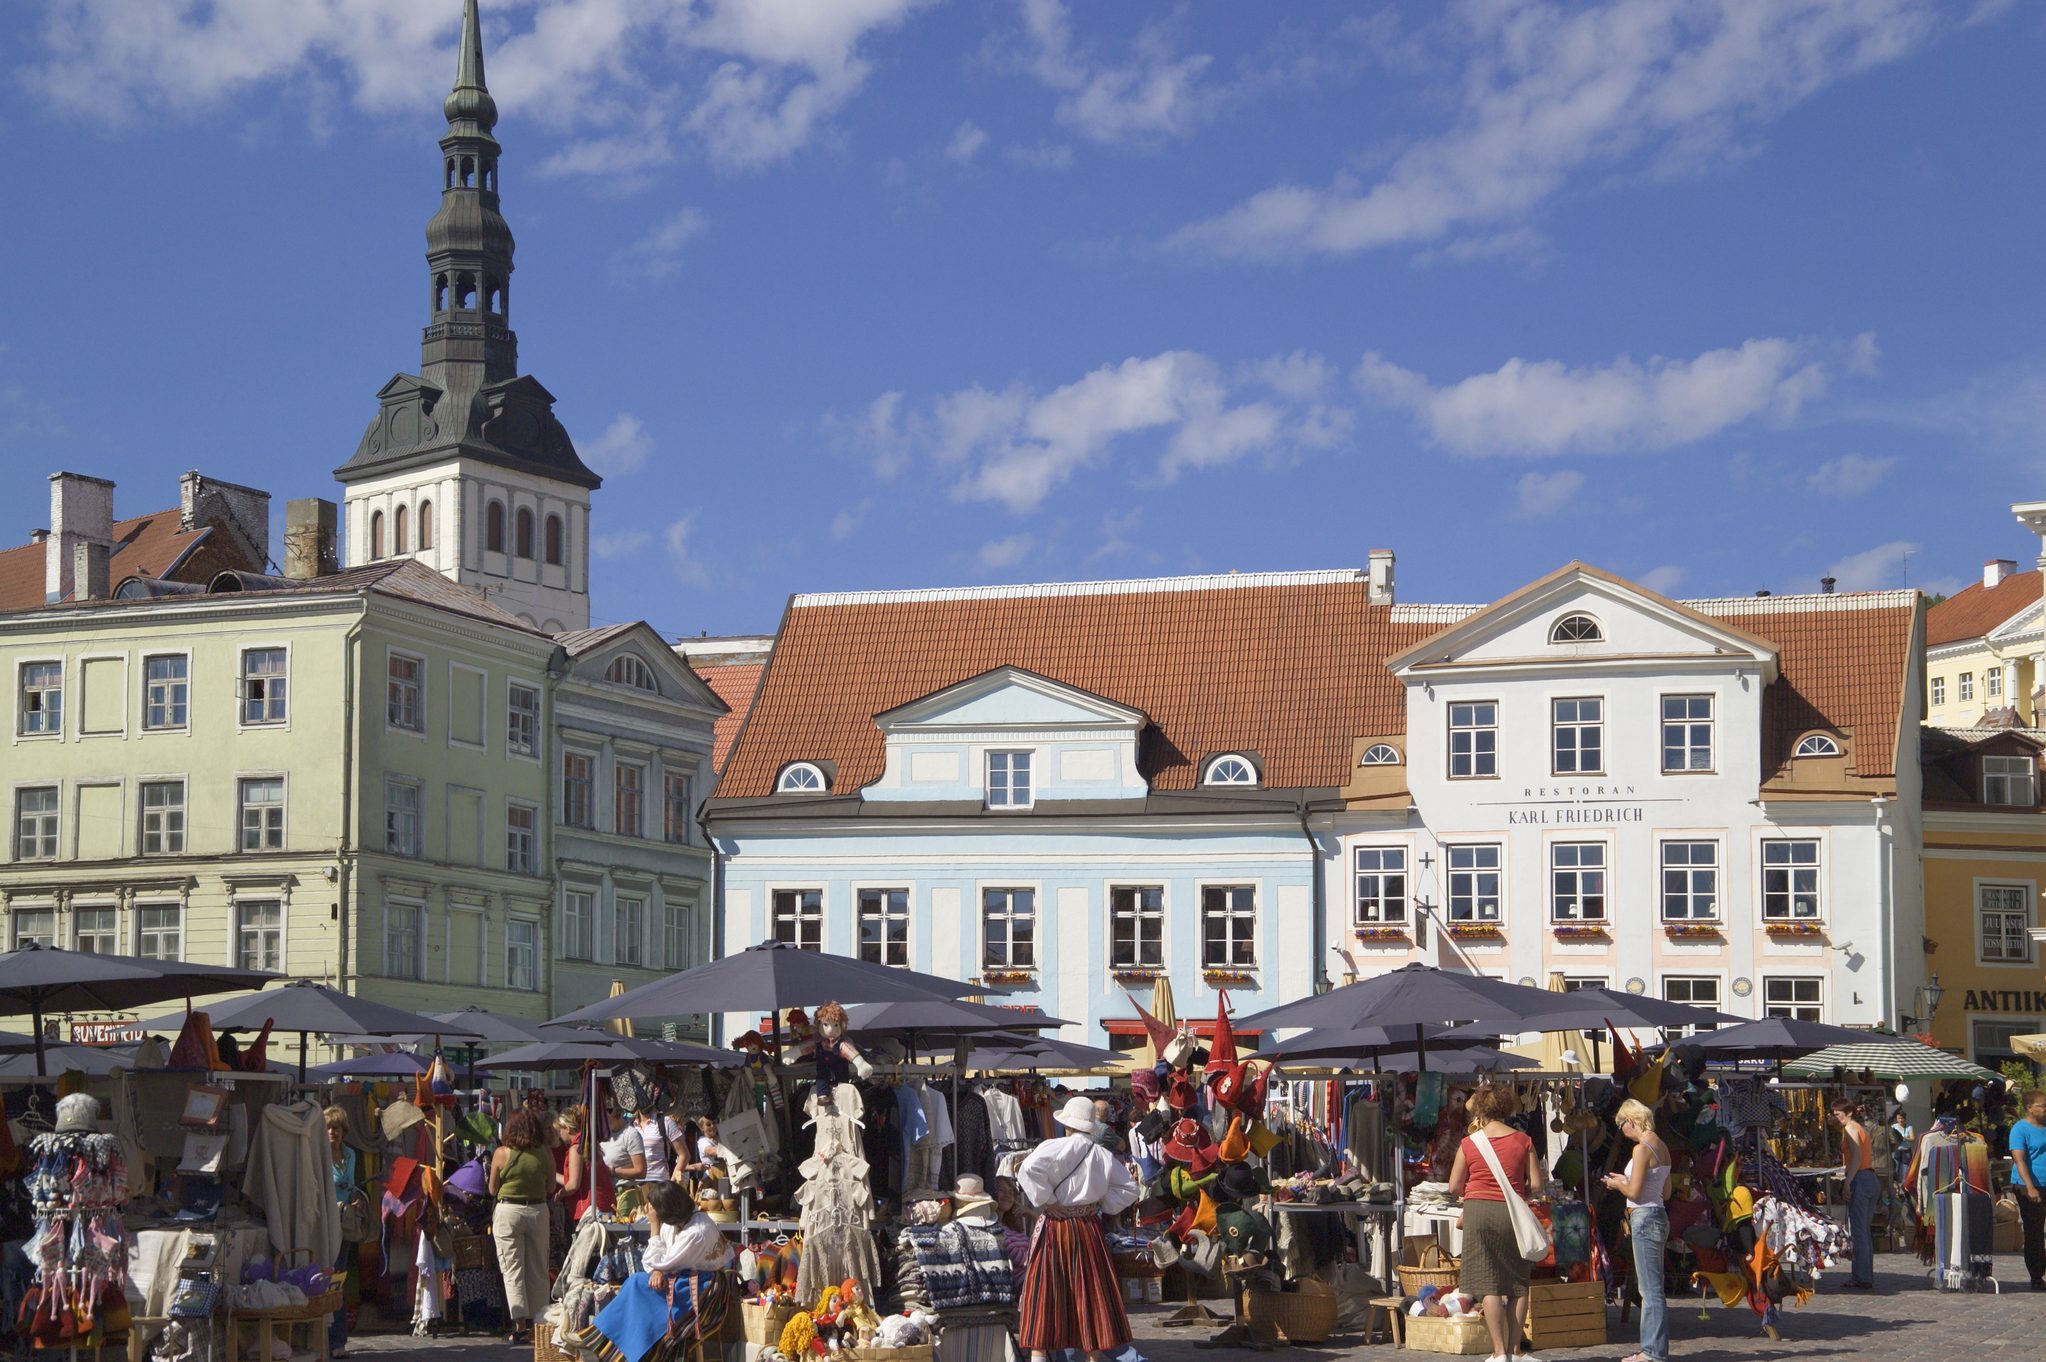 <p class=""><strong>Best for: </strong>Holiday markets and winter charm</p> <p>There are definitely some surprises in the survey, says Webber, including multiple spots in Eastern Europe that fill the middle of the list, starting with Tallinn. "Eastern European cities are hidden gems for senior citizens," she says. "[They] are perhaps lesser-known vacation destinations, but this study highlights they have plenty to offer for senior citizens."</p> <p>Tallinn has been experiencing what InsureMyTrip calls "a boom in tourism," with a 33% increase in foreign tourism this year, according to SchengenVisaInfo.com. The quality of things to do (rated 4.61 out of 5) and health care contribute to its high score. This well-preserved medieval city is beautiful to visit anytime, but it's one of our <a href="https://www.rd.com/list/beautiful-snow-covered-towns-around-the-world/" rel="noopener noreferrer">favorite snow-covered towns</a> to visit in winter, when the lights of the Old Town against the snow create plenty of warmth. Any time of year, stroll the historic district and visit the walled fortifications; then stop into a cafe for a coffee or wine.</p> <p class="listicle-page__cta-button-shop"><a class="shop-btn" href="https://www.tripadvisor.com/Hotel_Review-g274958-d620162-Reviews-Hotel_Telegraaf-Tallinn_Harju_County.html">Book a Hotel</a></p>